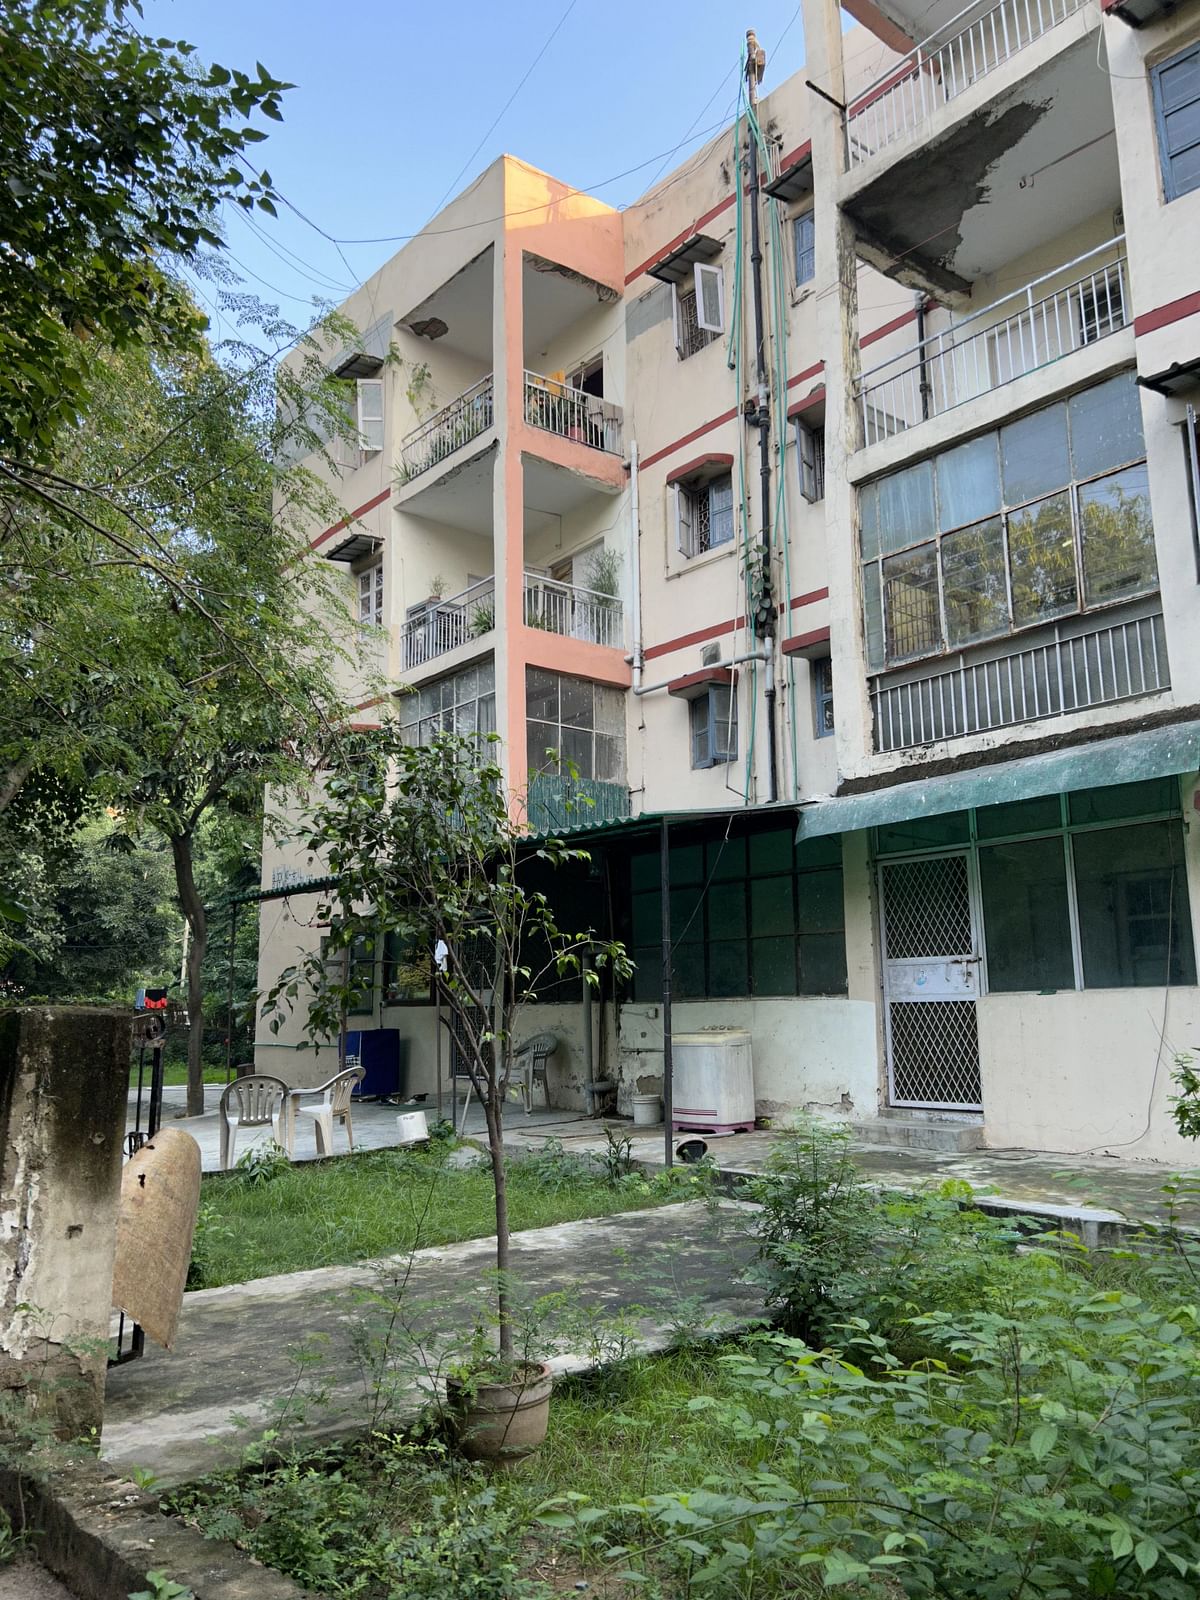 Residents alleged that the security, electricity and water supplies have been cut in Delhi’s Vasant Vihar colony.